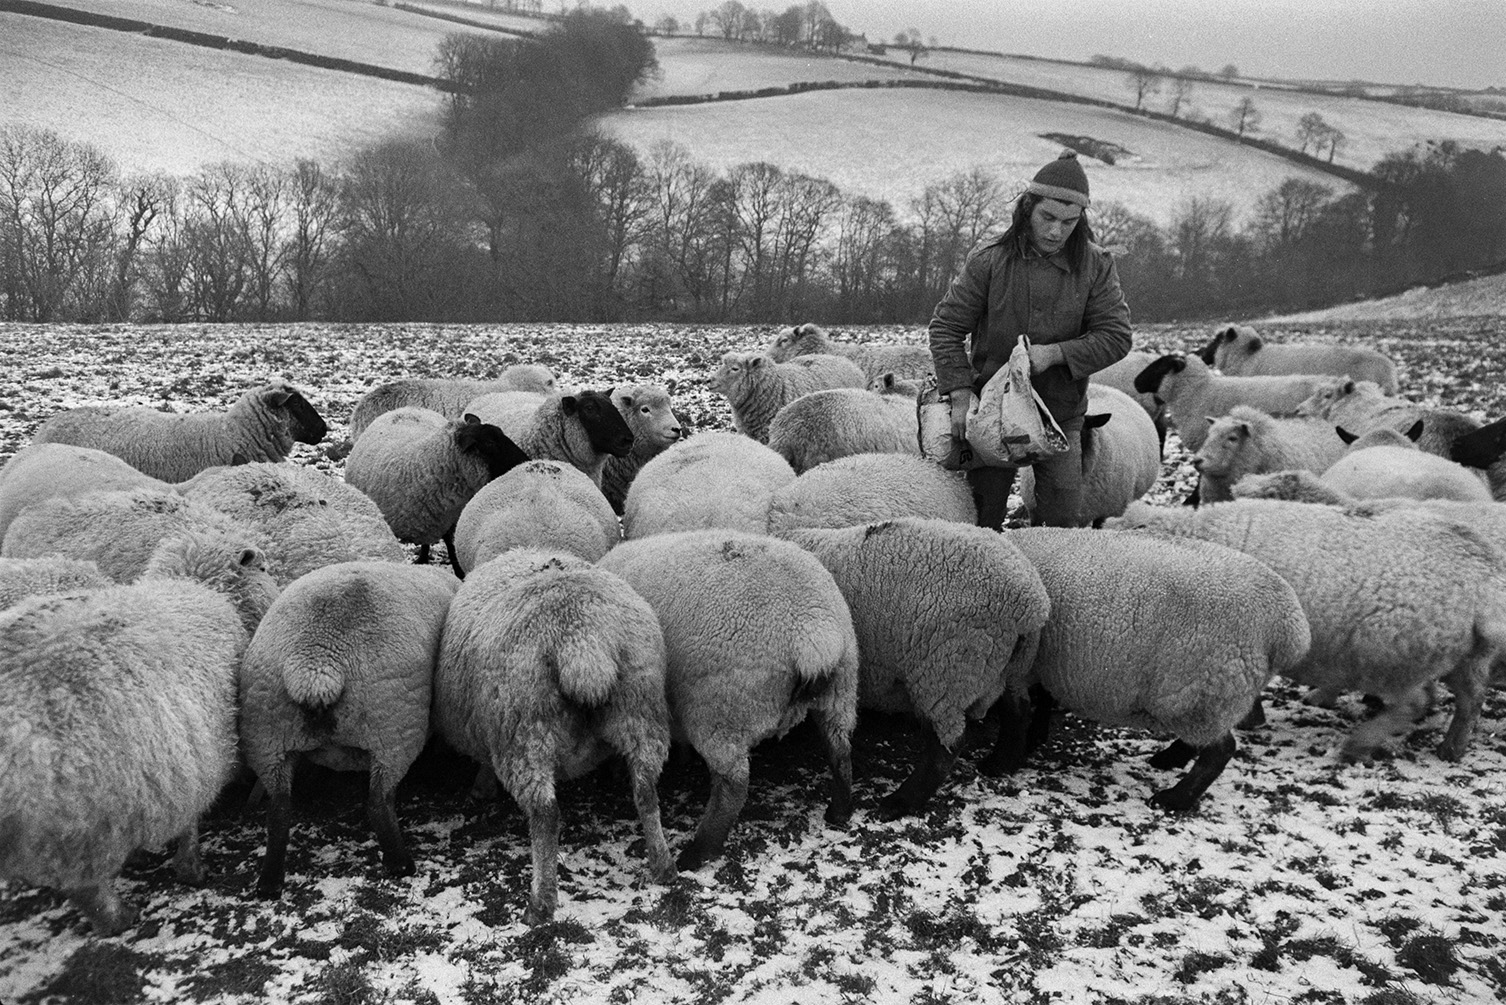 Derek Bright feeding sheep in a snow covered field at Mill Road Farm, Beaford. He is filling a trough from a sack of feed. More snow covered fields, trees and hedgerows can be seen in the background. The farm was also known as Jeffrys.